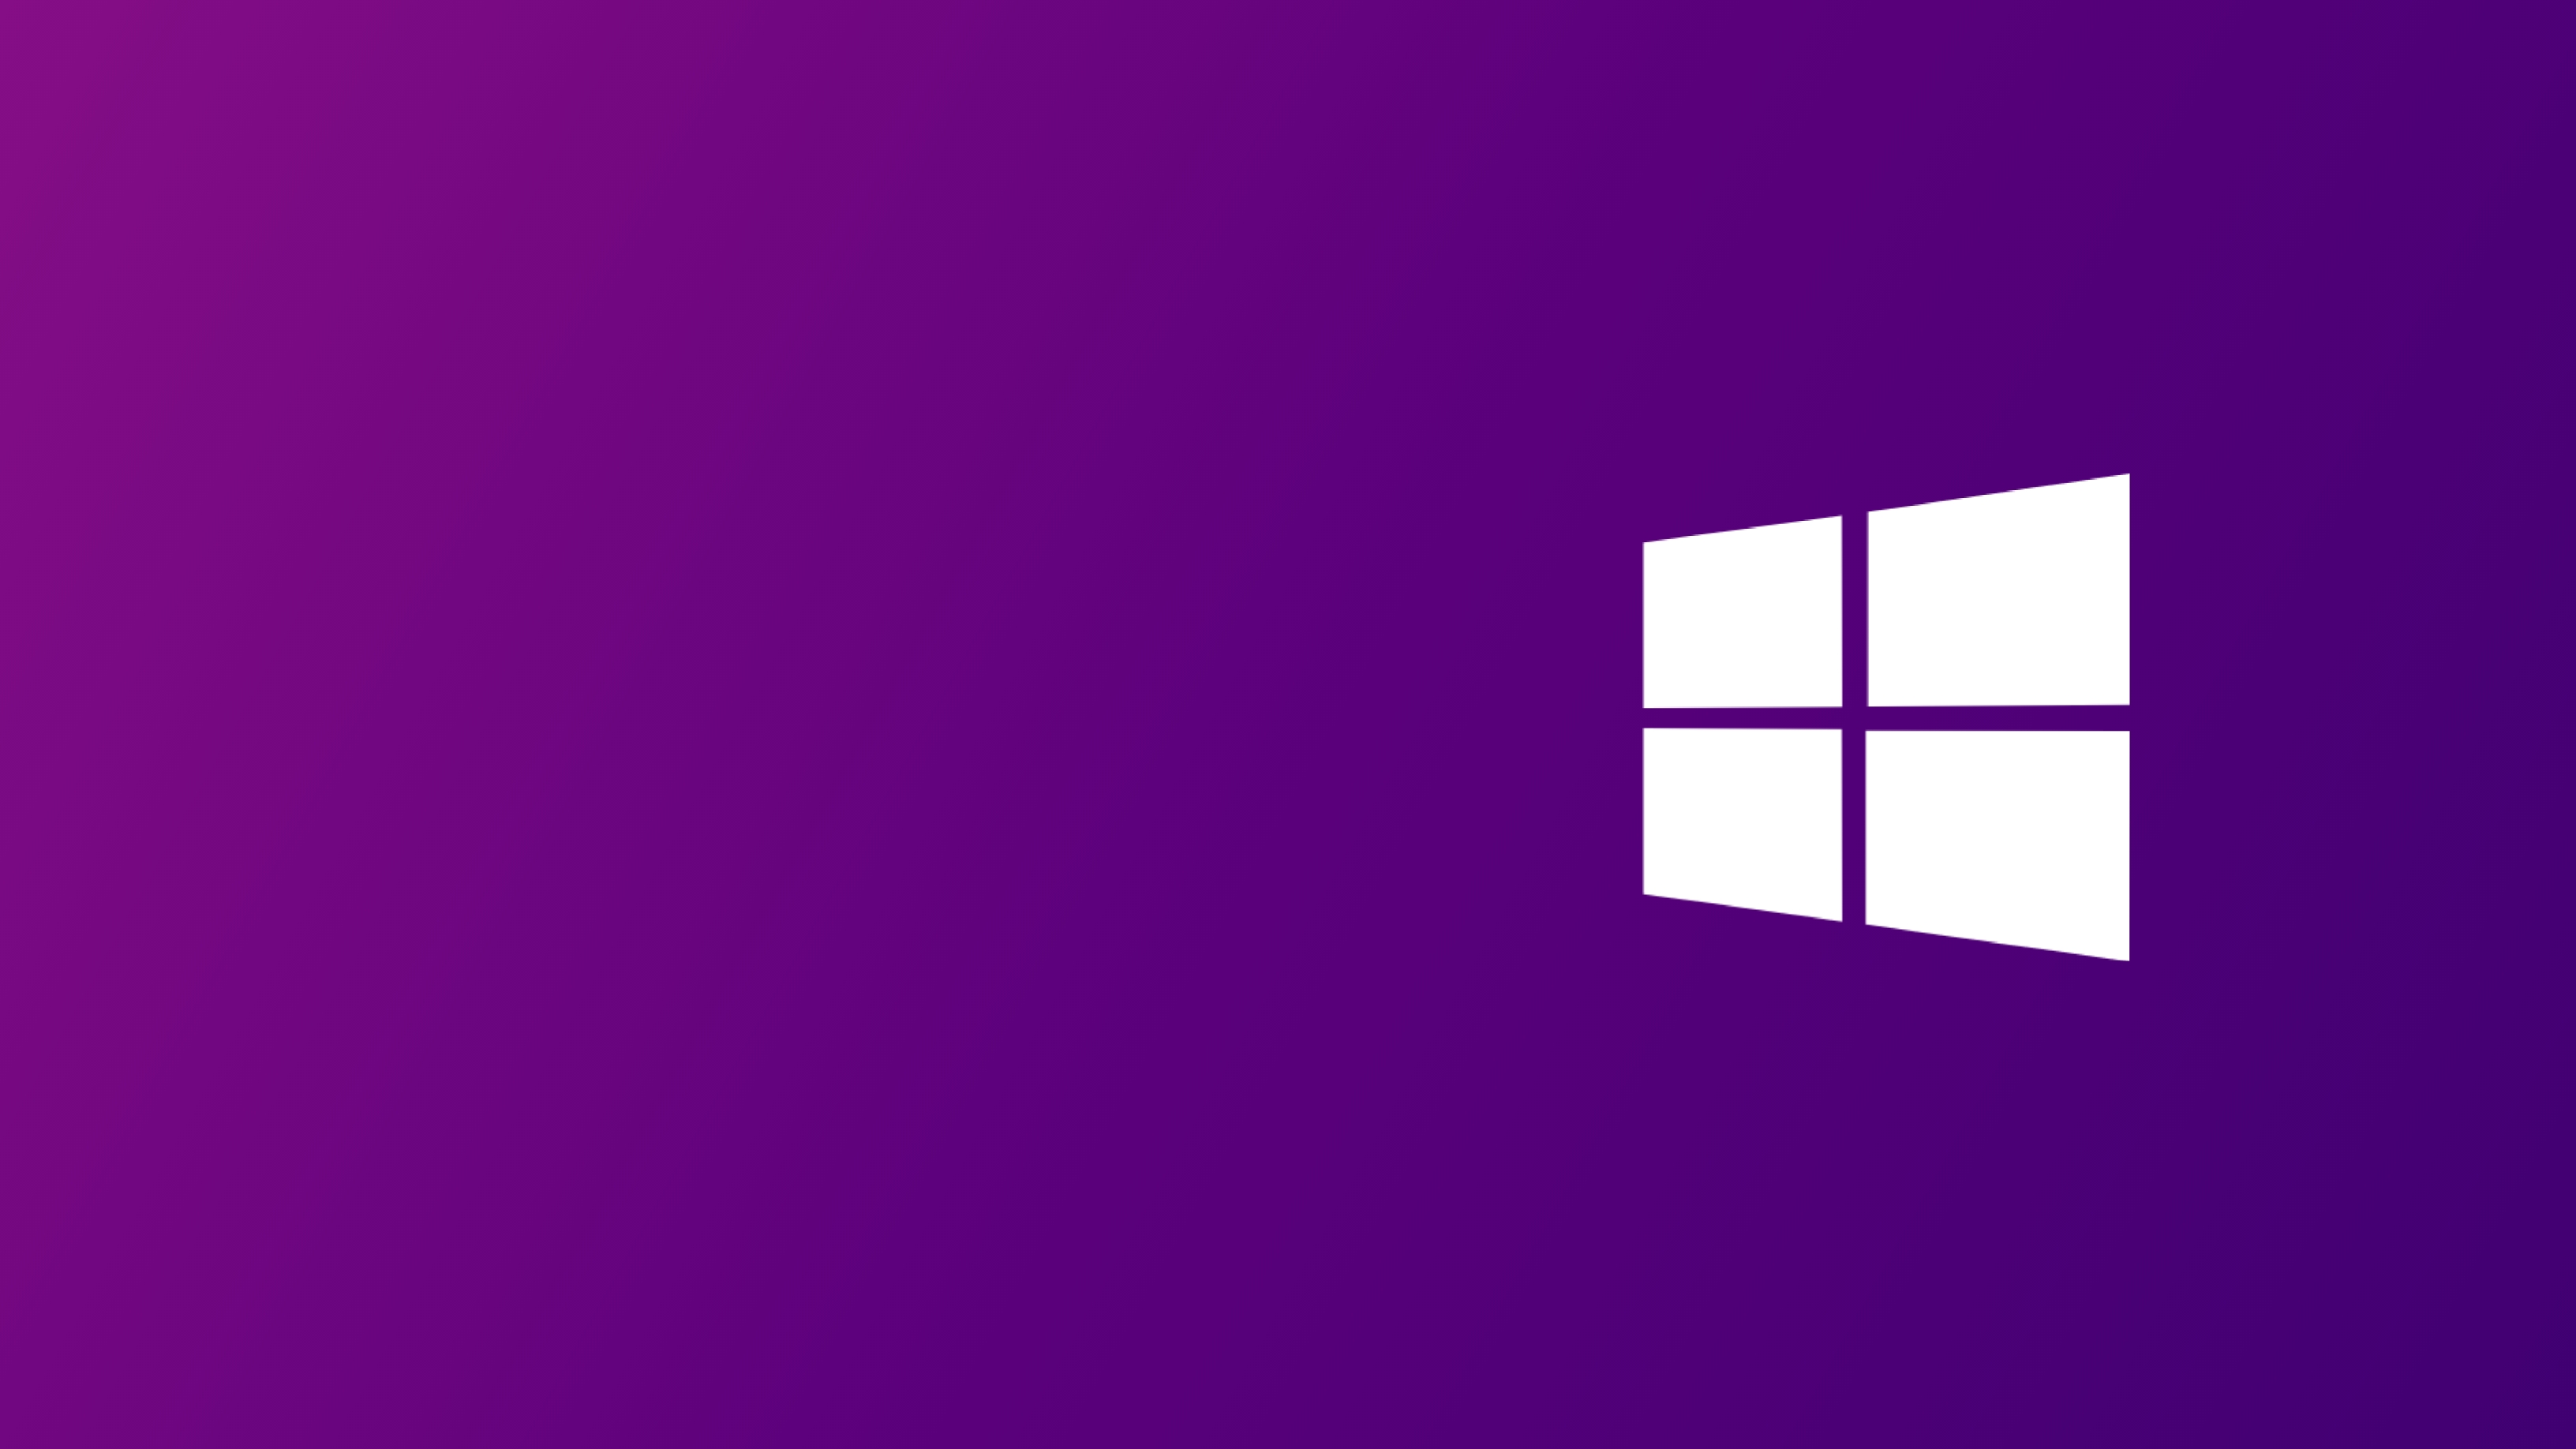 Windows 10 Picture by ToastcodeDev